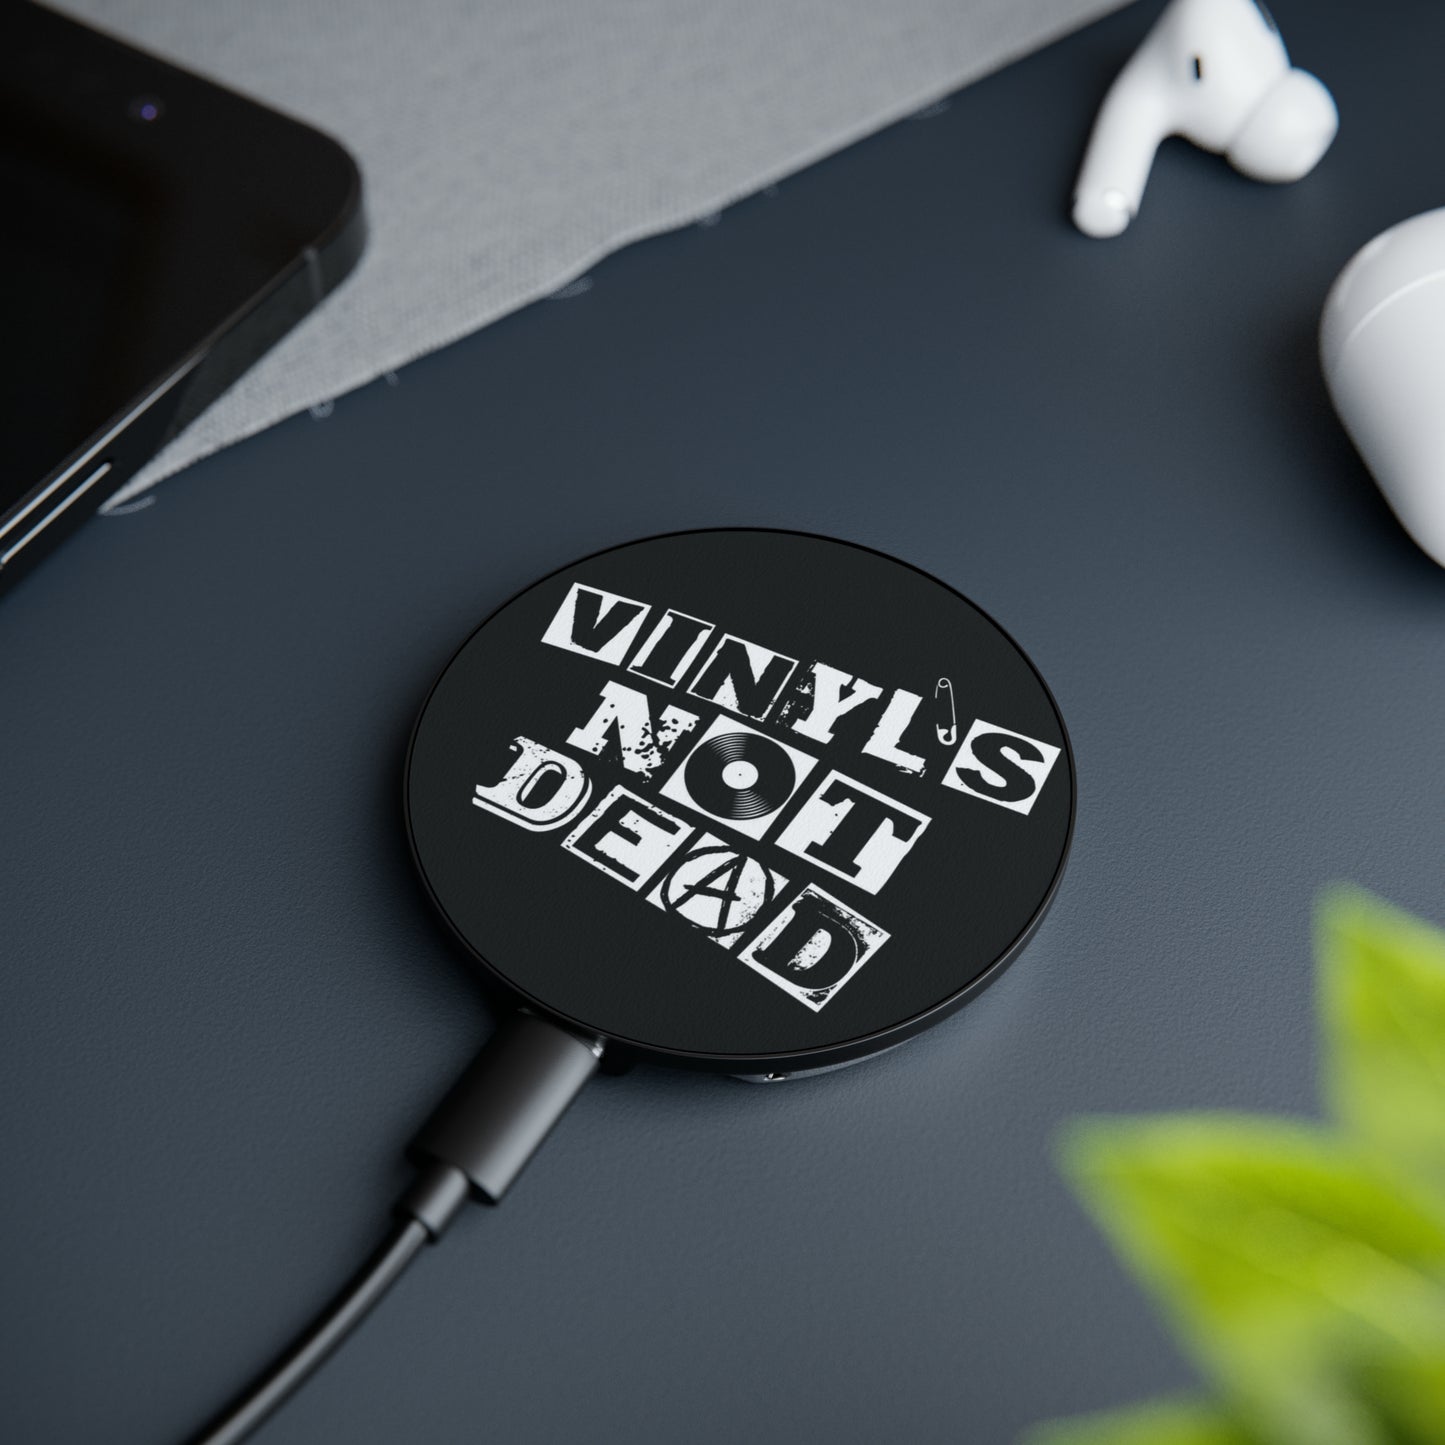 Vinyl Record Themed Magnetic Induction Charger with Vinyl is Not Dead Print on desk